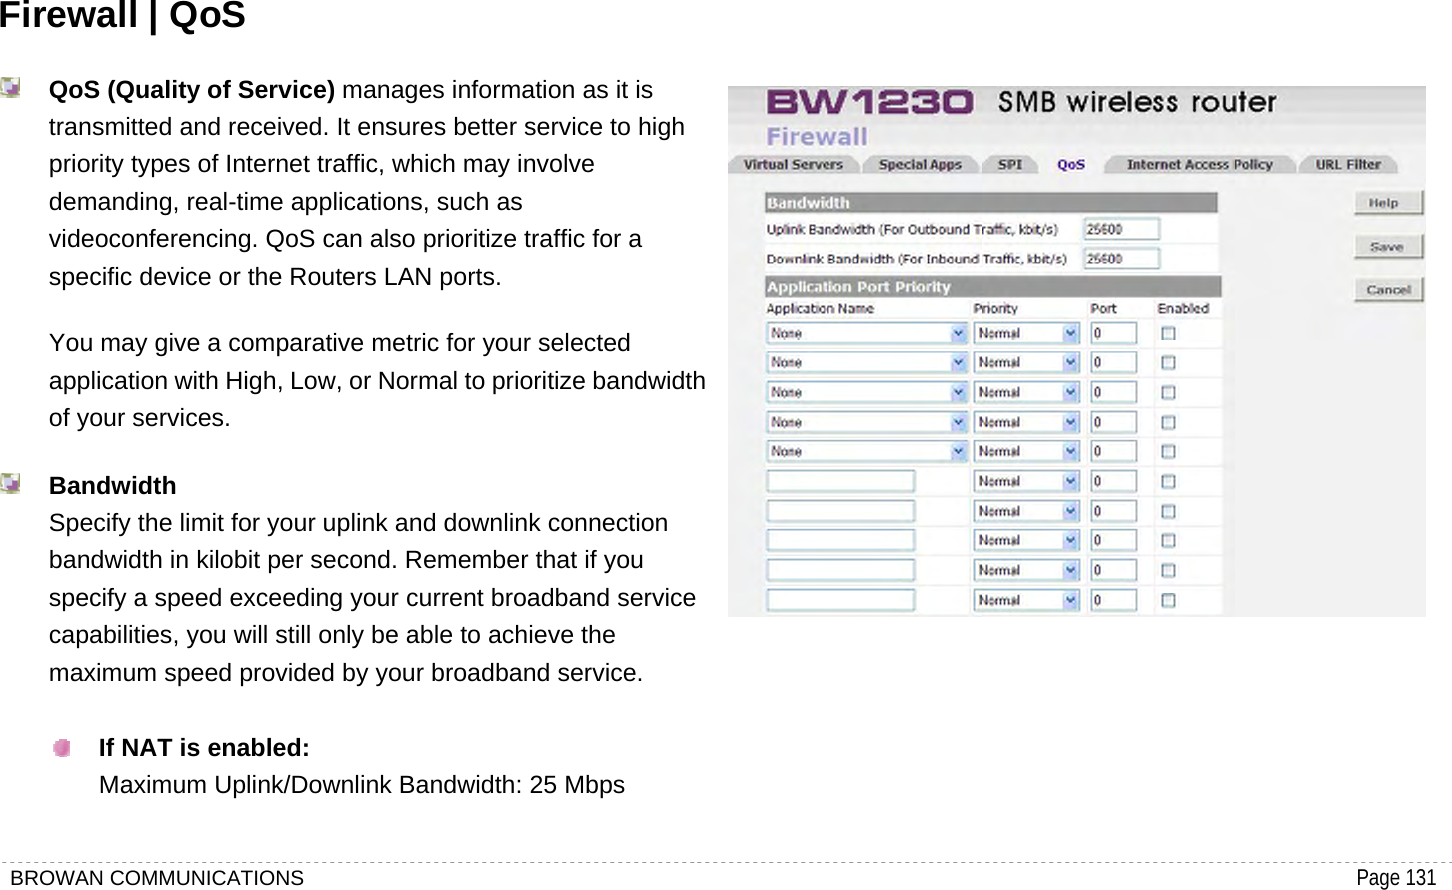 BROWAN COMMUNICATIONS                                                                                           Page 131  Firewall | QoS  QoS (Quality of Service) manages information as it is transmitted and received. It ensures better service to high priority types of Internet traffic, which may involve demanding, real-time applications, such as videoconferencing. QoS can also prioritize traffic for a specific device or the Routers LAN ports.   You may give a comparative metric for your selected application with High, Low, or Normal to prioritize bandwidth of your services.  Bandwidth Specify the limit for your uplink and downlink connection bandwidth in kilobit per second. Remember that if you specify a speed exceeding your current broadband service capabilities, you will still only be able to achieve the maximum speed provided by your broadband service.   If NAT is enabled: Maximum Uplink/Downlink Bandwidth: 25 Mbps       